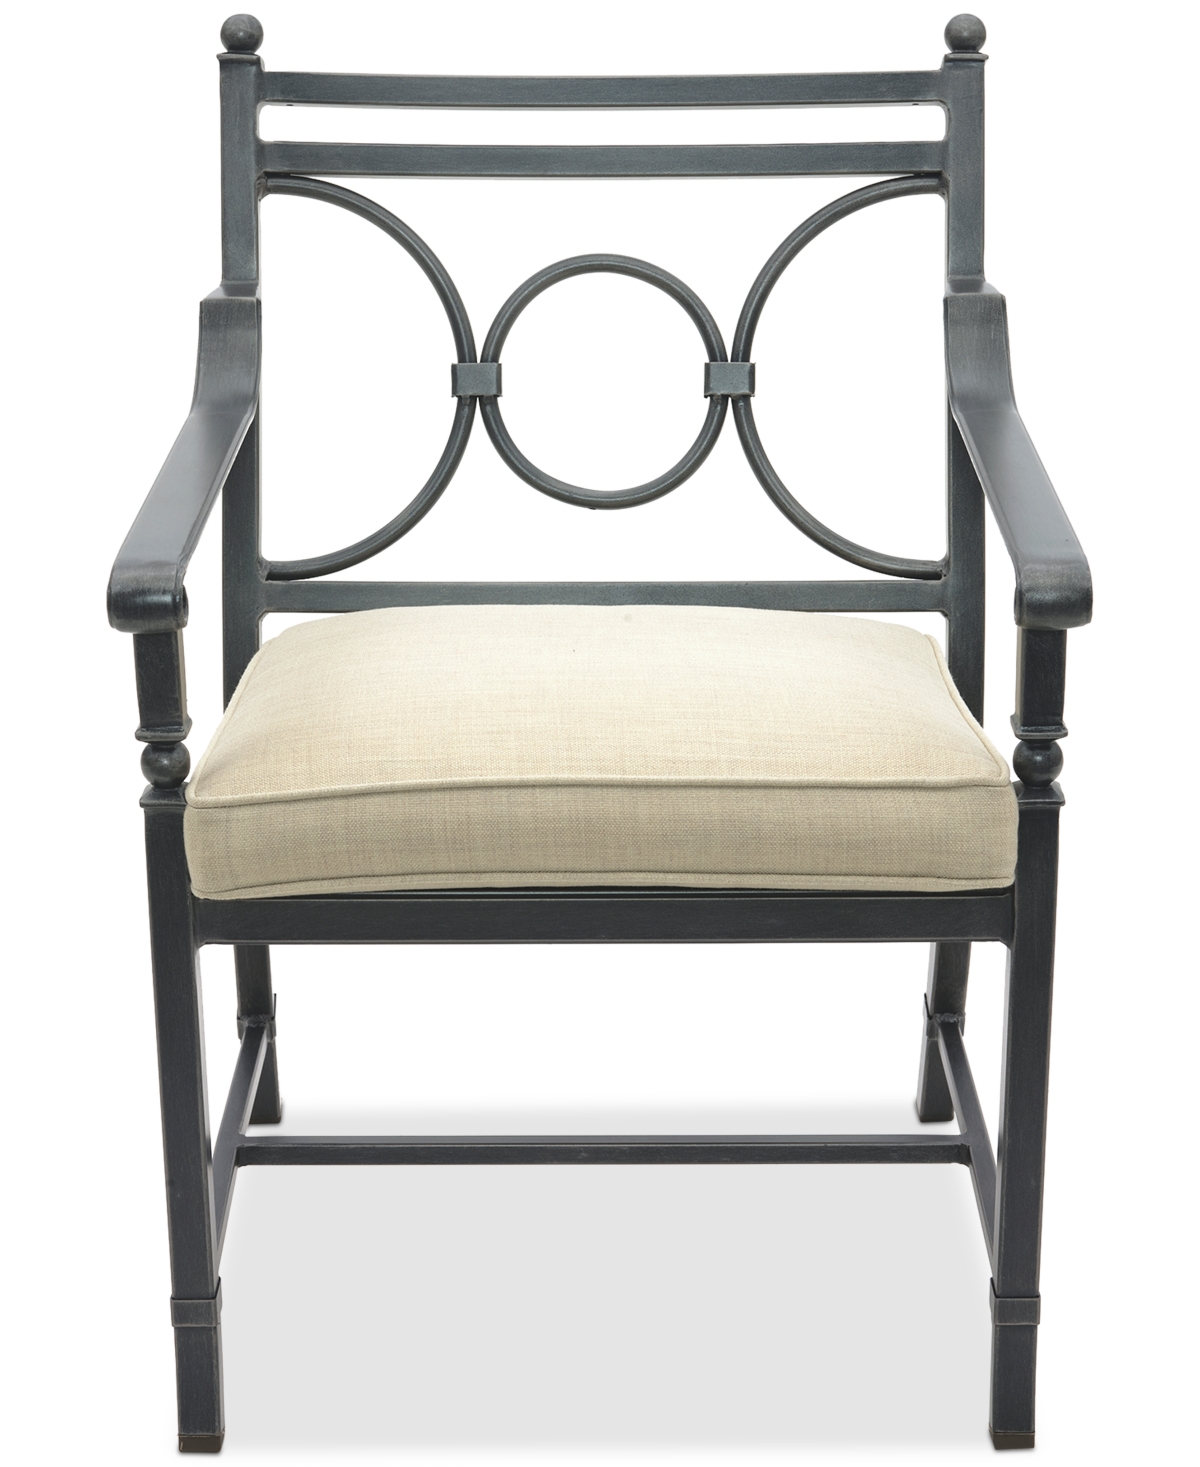 Agio Wythburn Mix And Match Scroll Outdoor Dining Chair In Straw Natural,bronze Finish